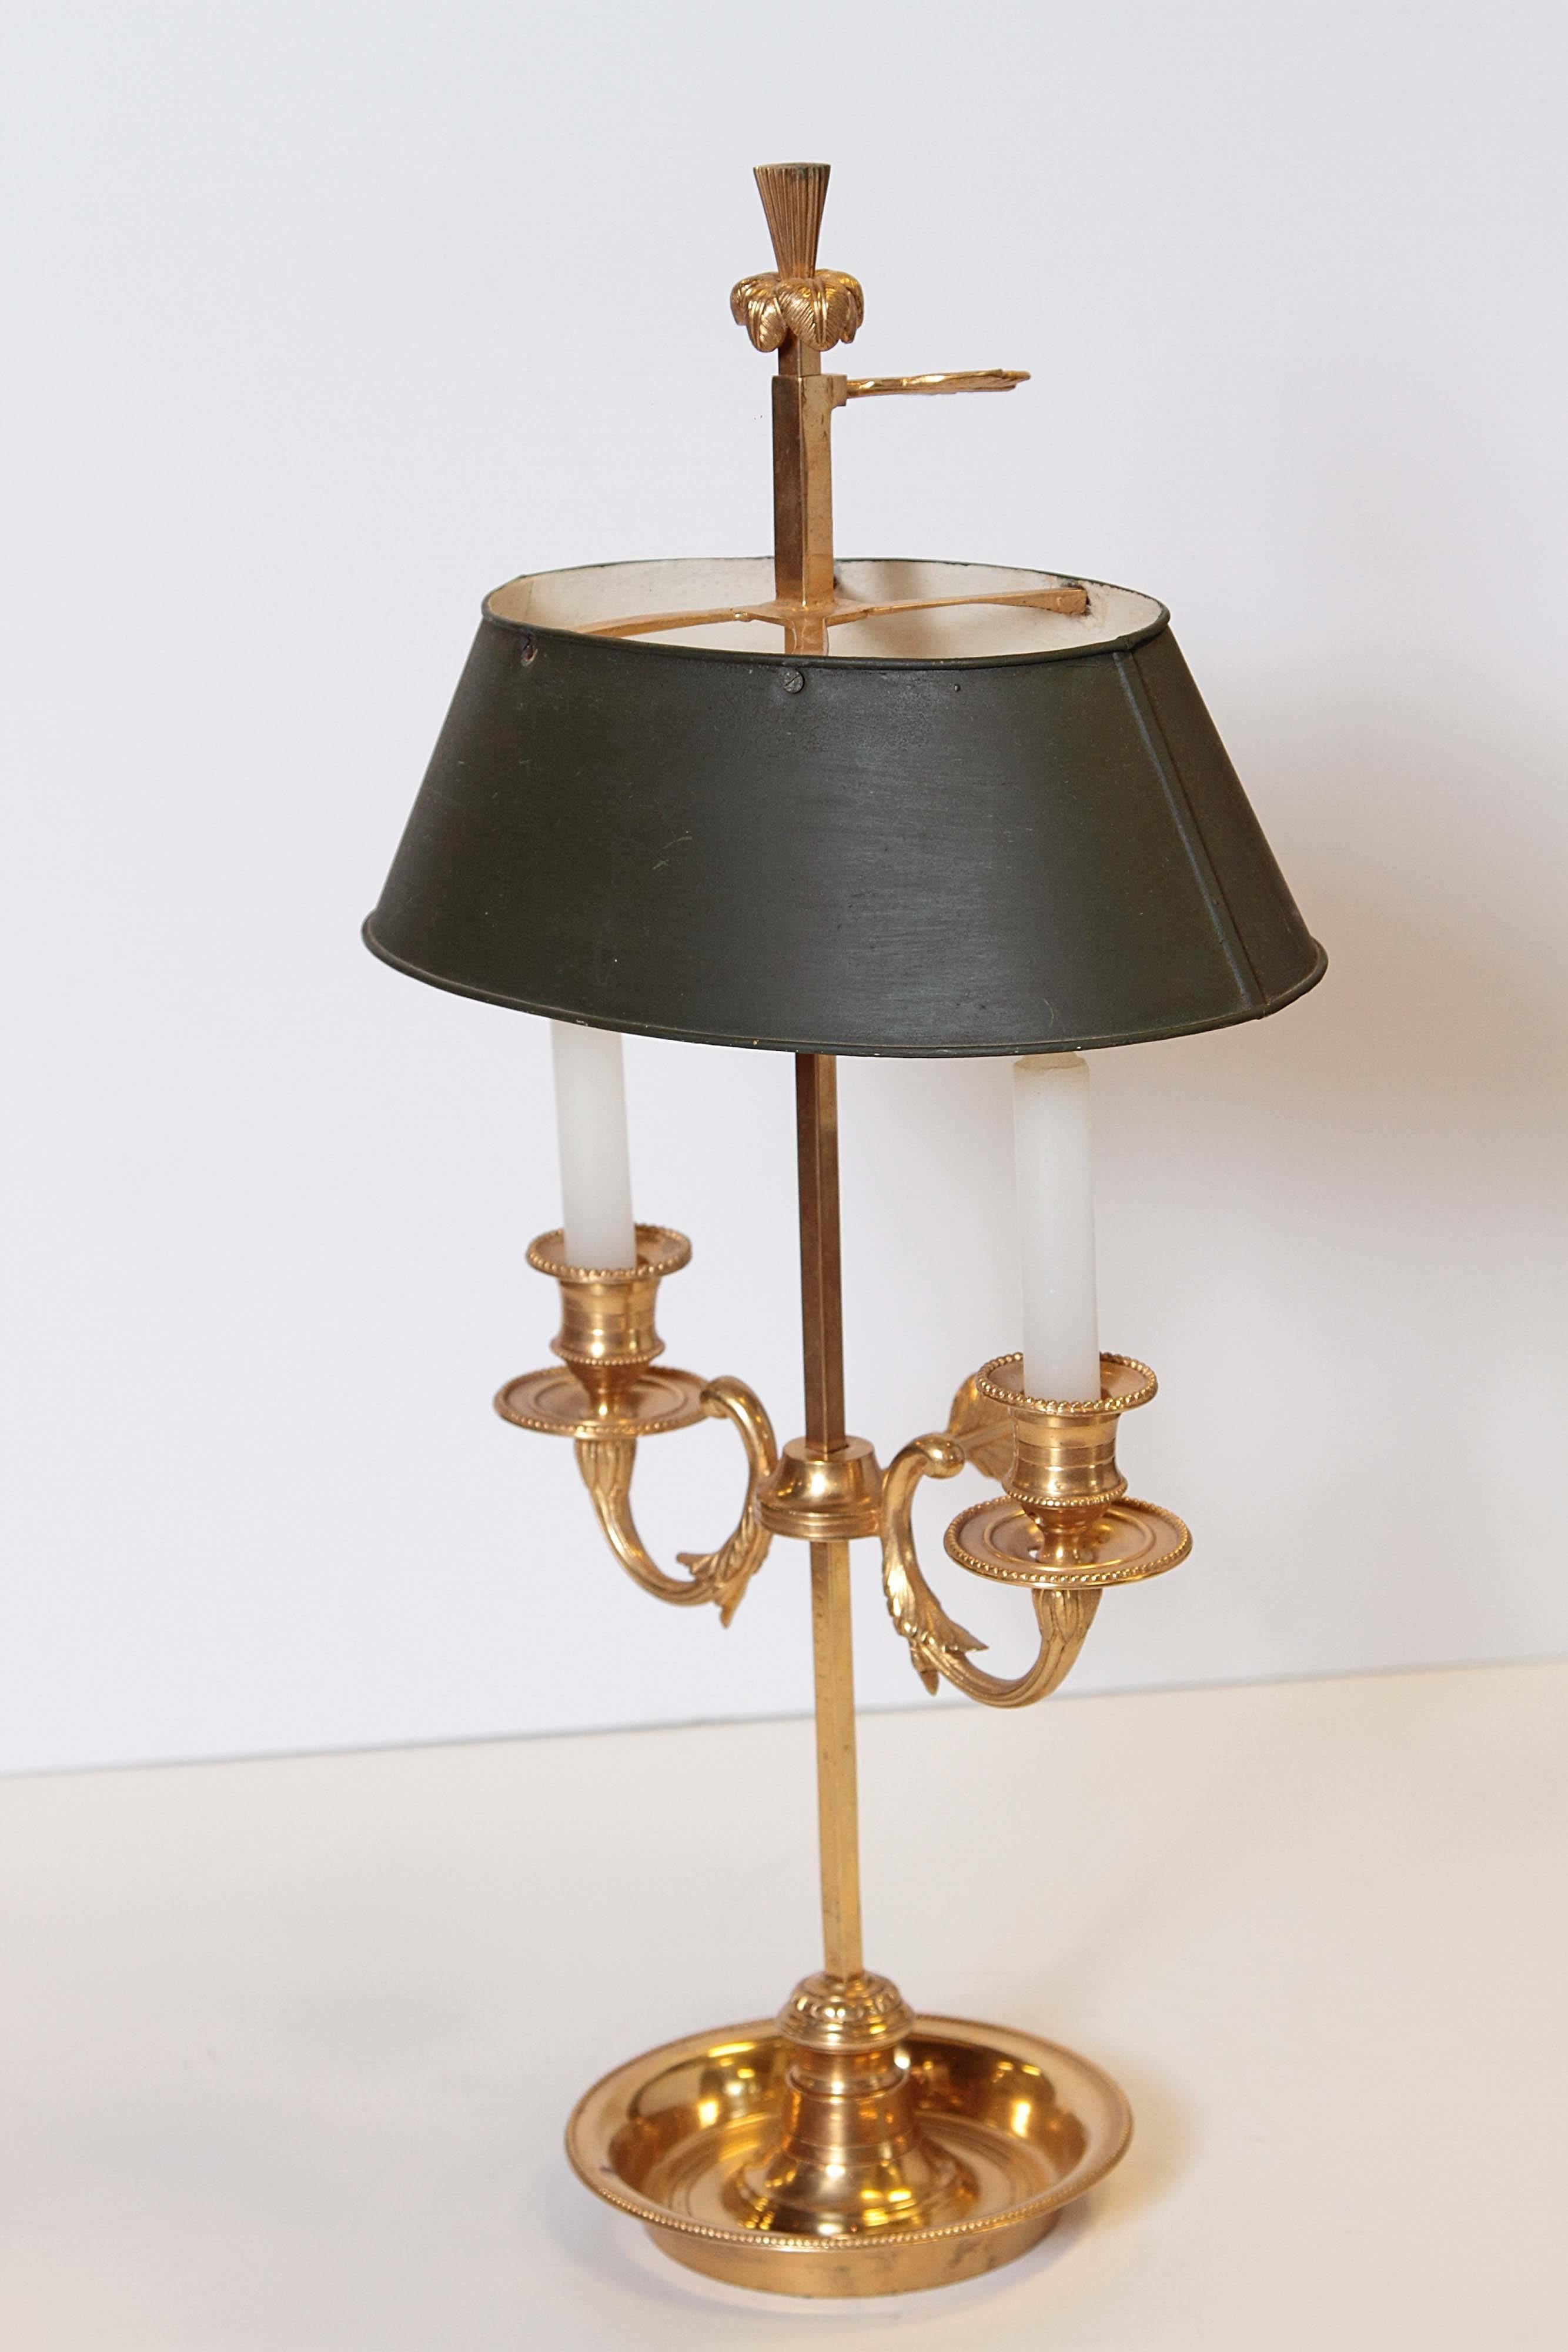 20th century Bouilotte lamp with two arms and oval shade. Lamp is not currently electrified. Holes are in place for re-wiring if desired. Shade is adjustable. Arms are adjustable.